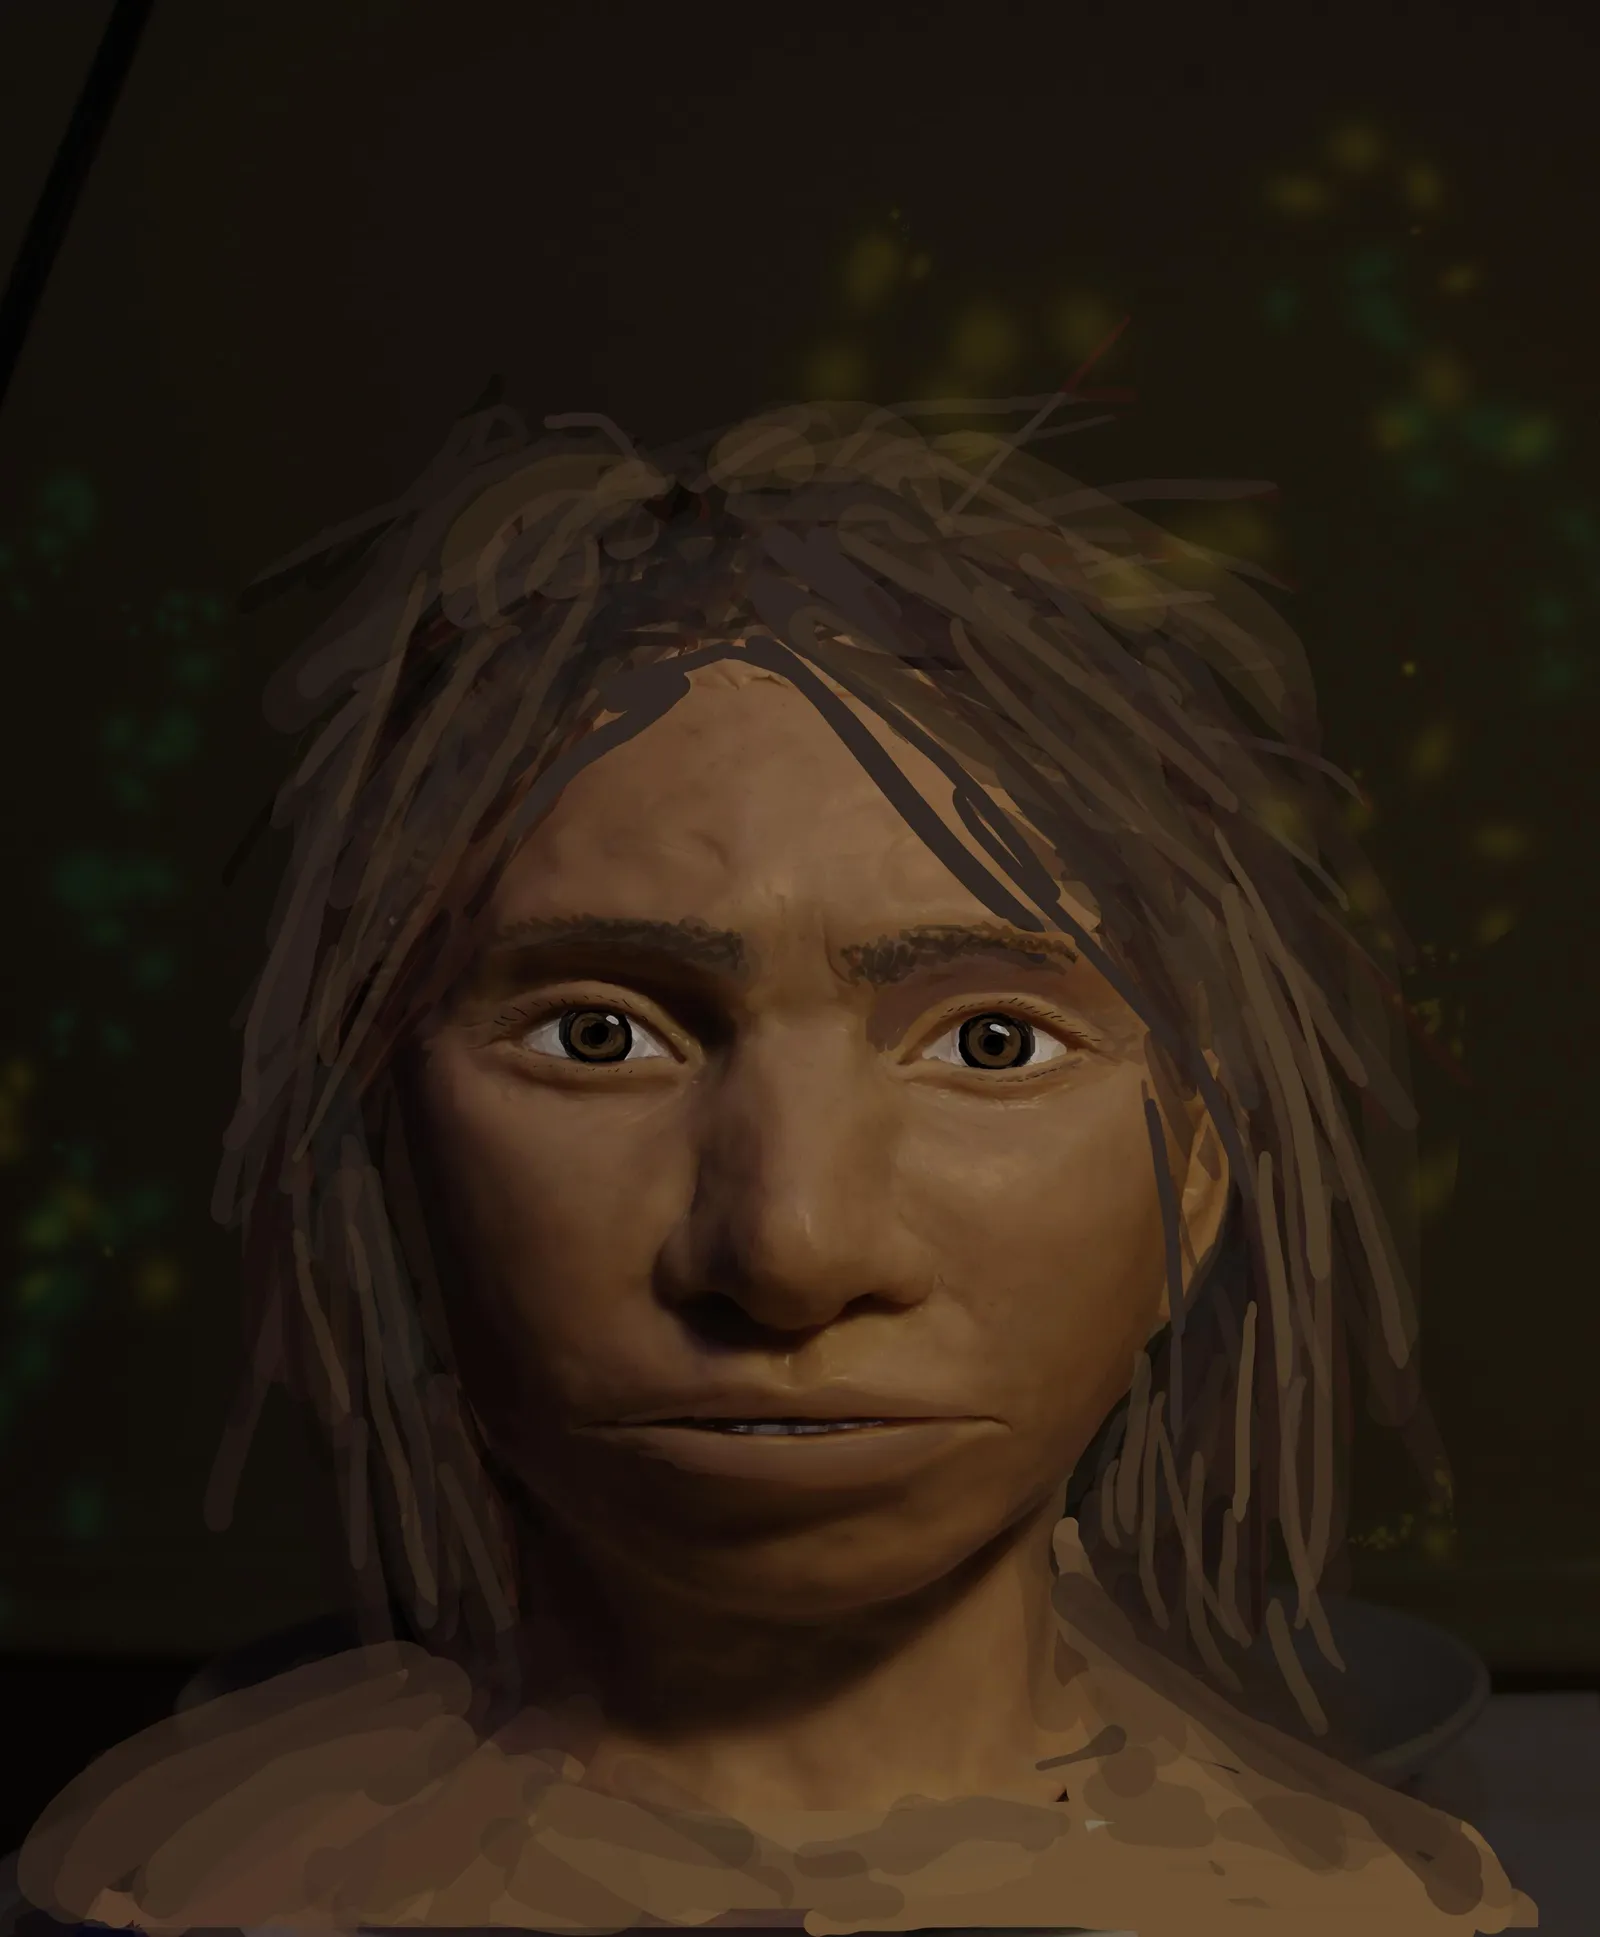 Meet Denny, the ancient mixed-heritage mystery girl, Evolution